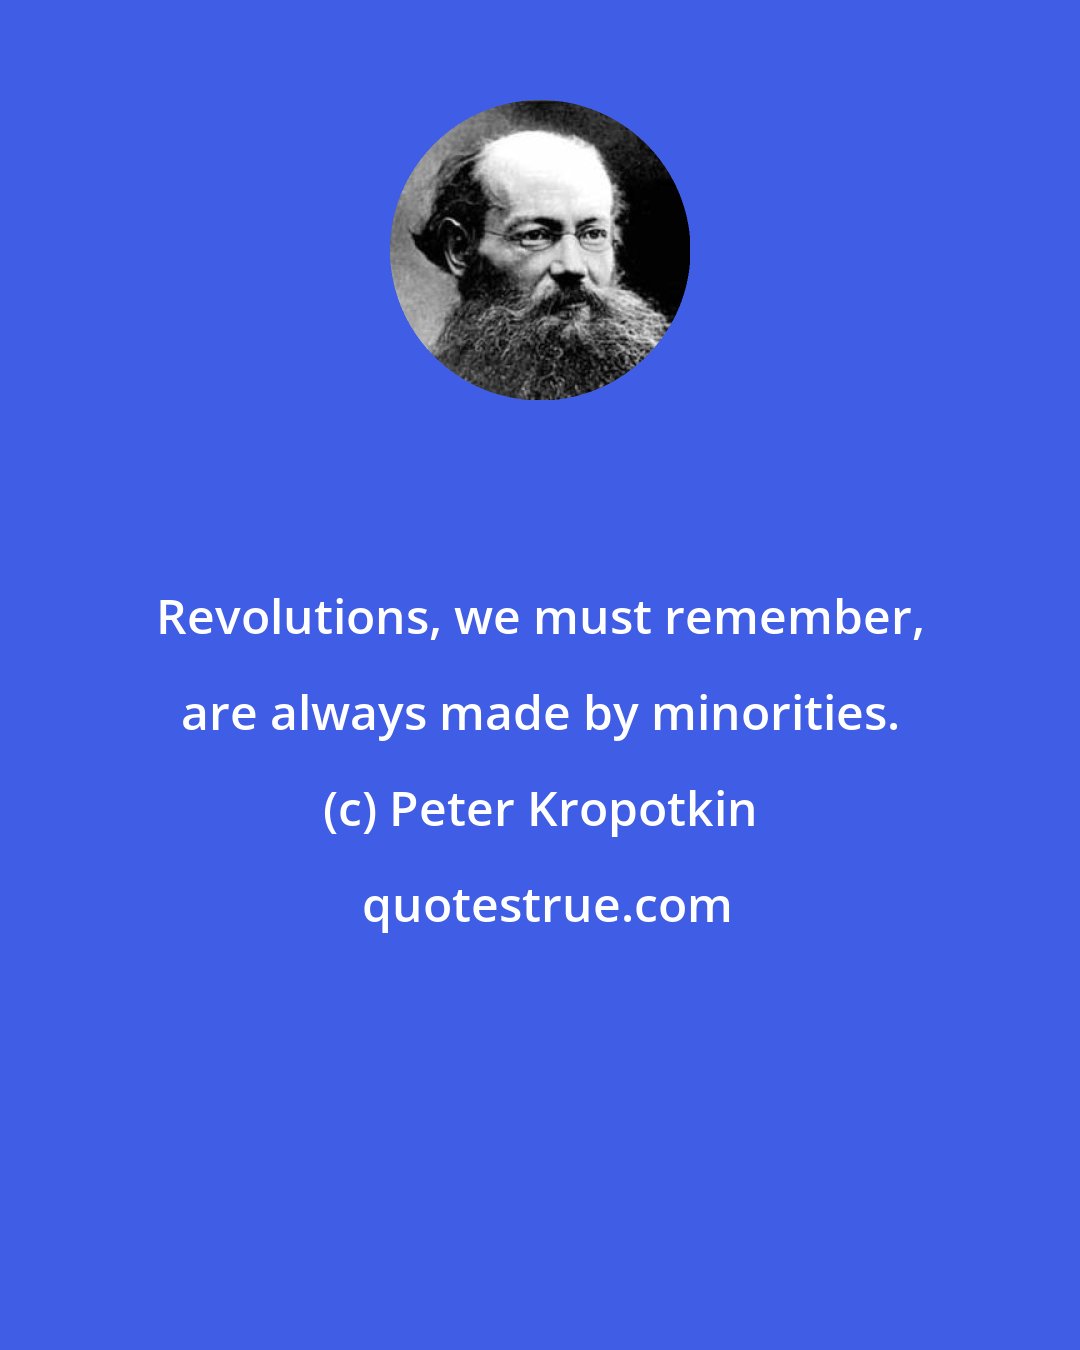 Peter Kropotkin: Revolutions, we must remember, are always made by minorities.